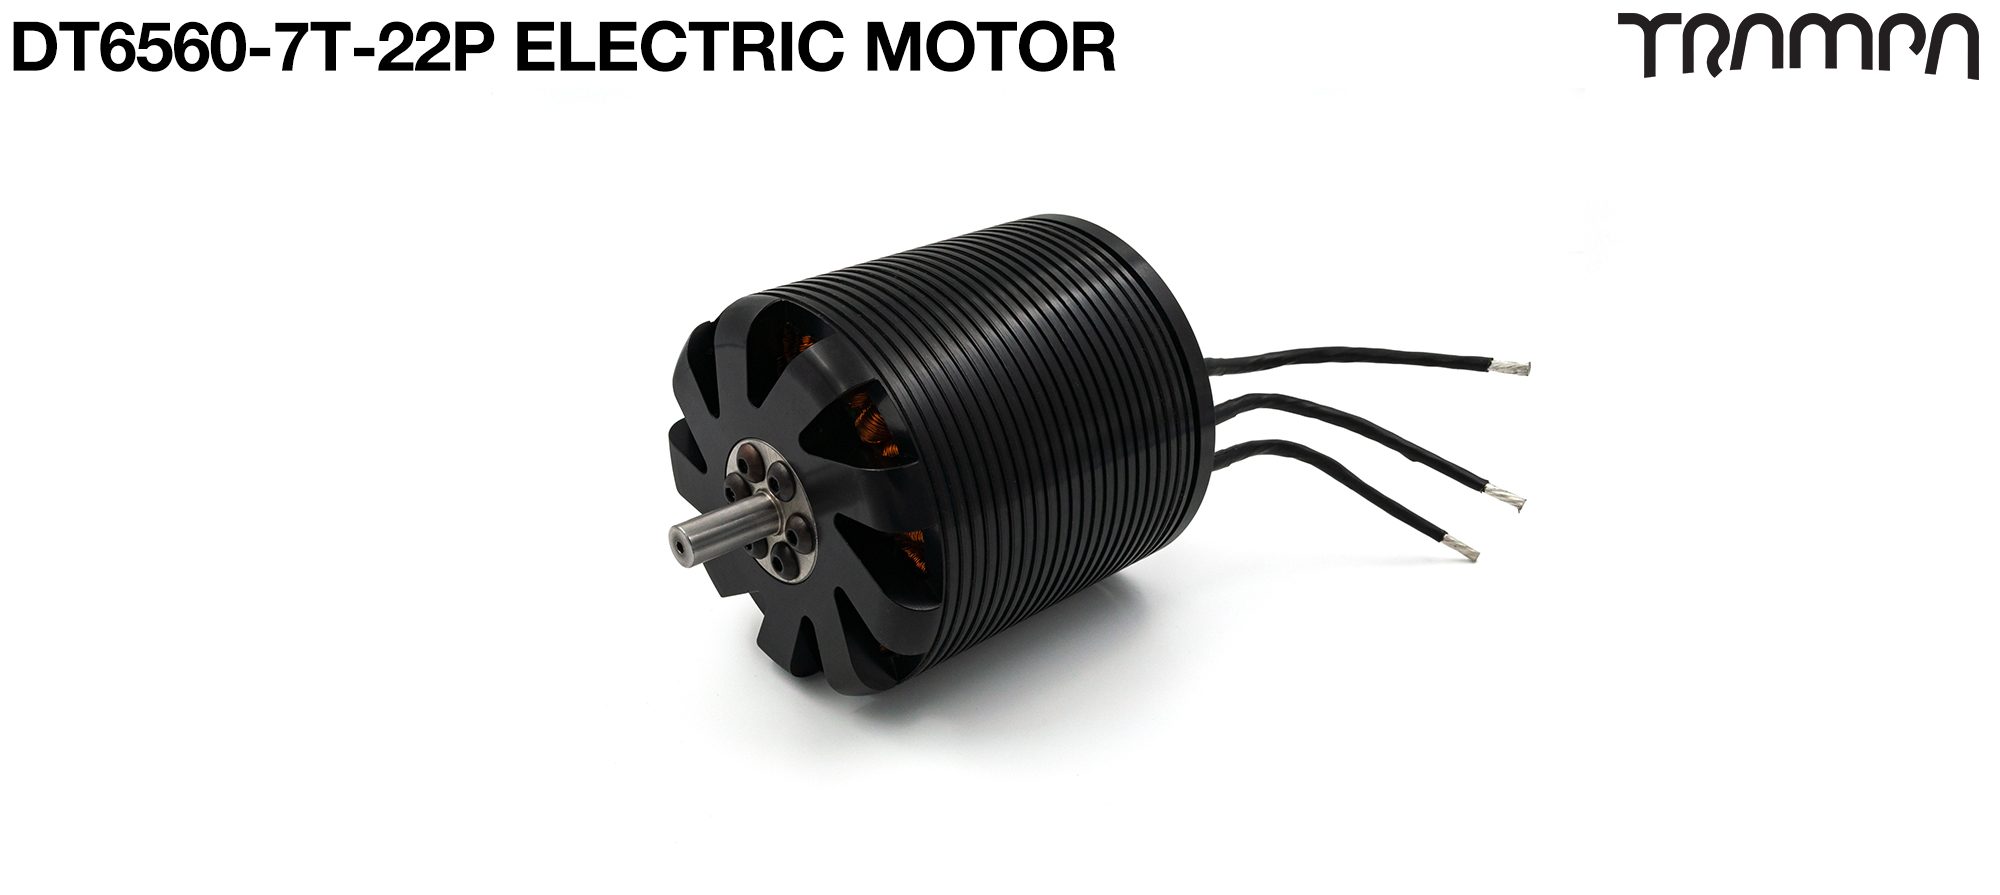 DT6560-7T-22P Electric Motor